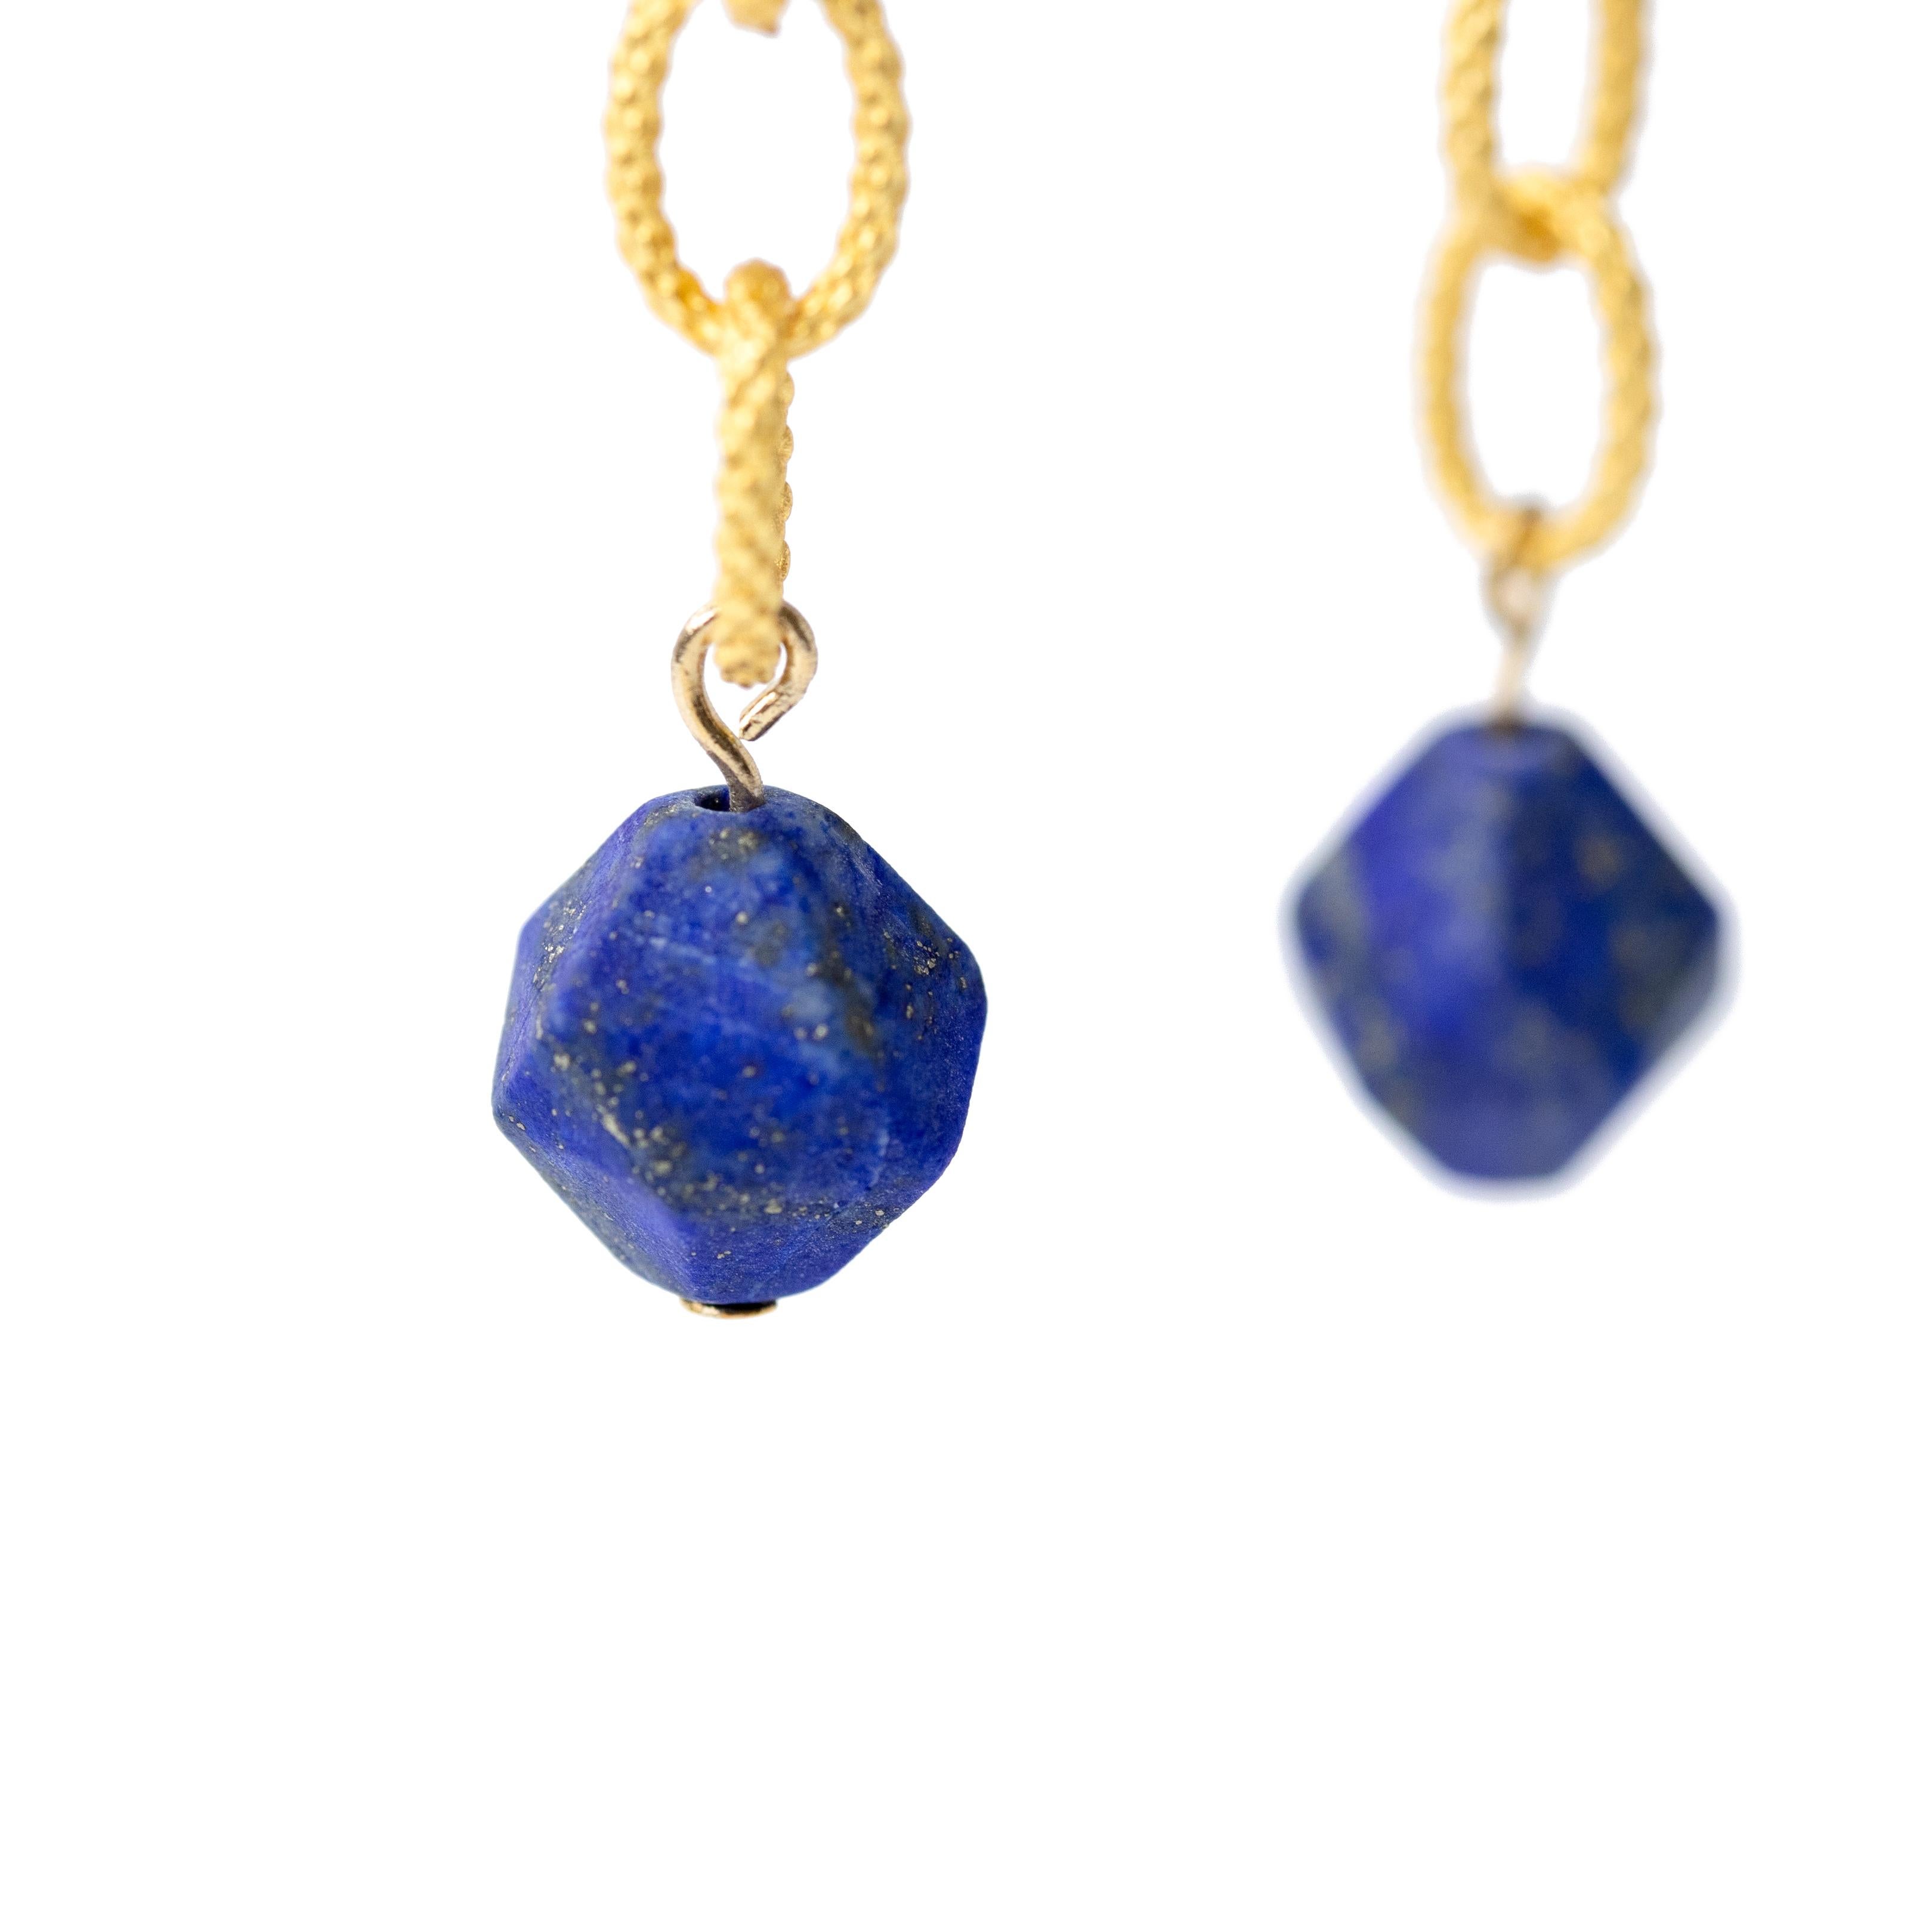 These earrings are handcrafted from Lapis Lazuli and detailed gold chain. They give you the perfect blend of subtle edginess and elegance to stand out effortlessly. 

* 2.5